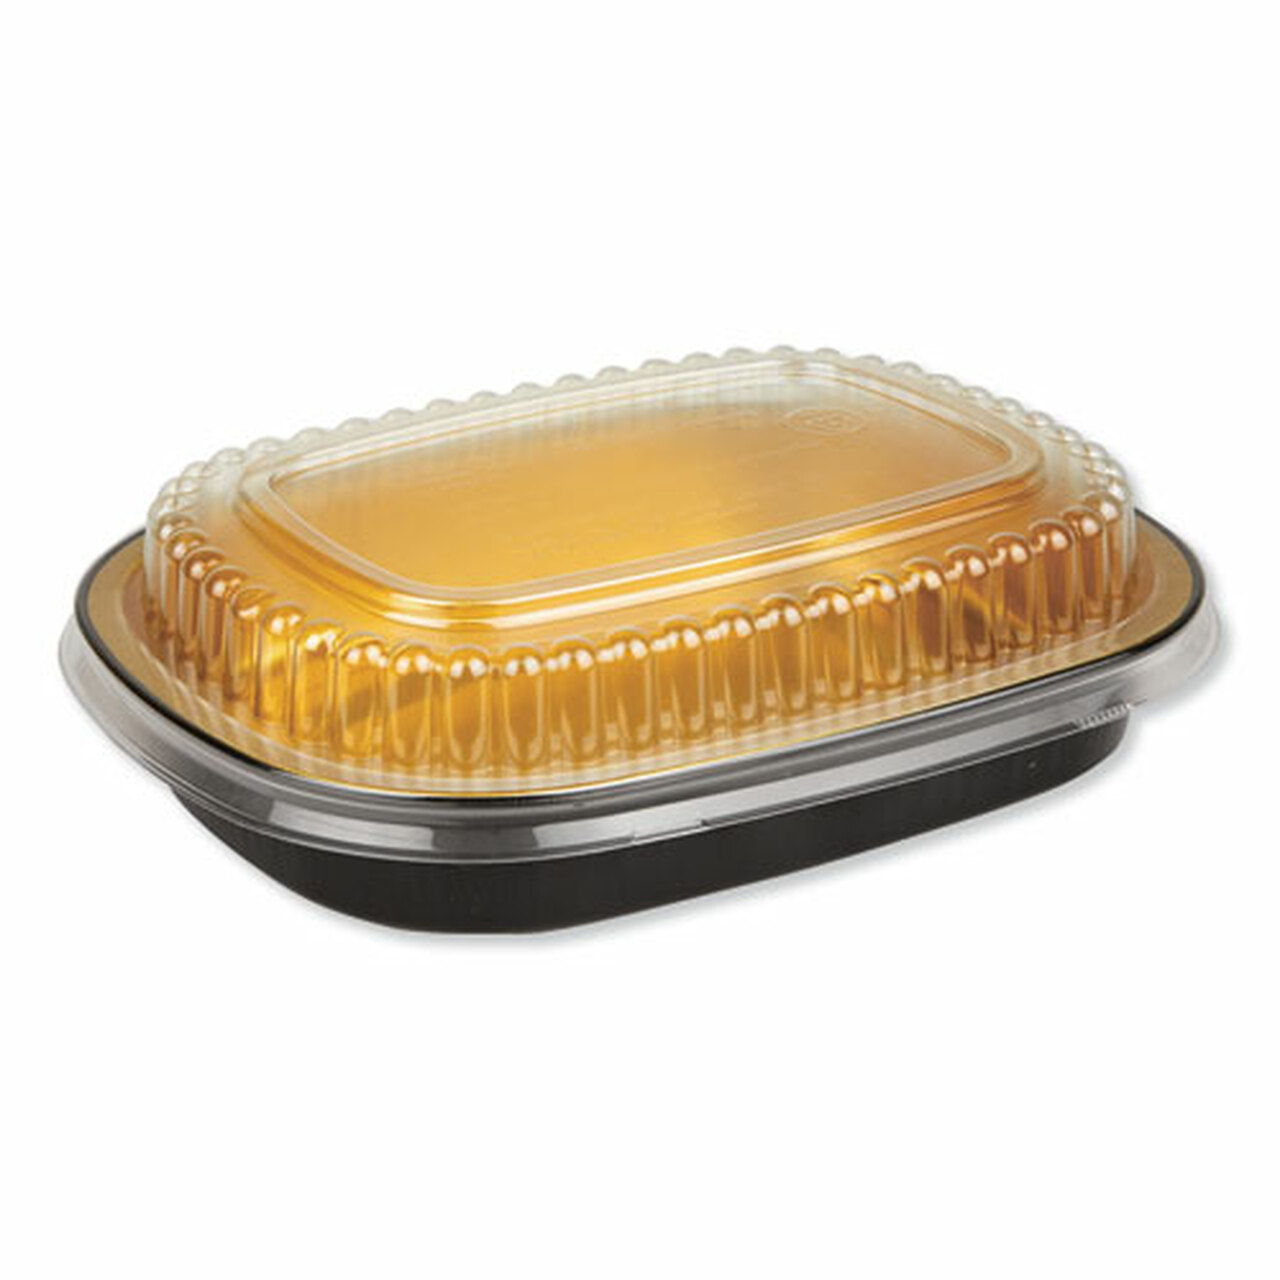 4201-55-100WDL/22BGCB Small 
Gold Foil Container with Lid 
(Gourmet-To-Go) - 100